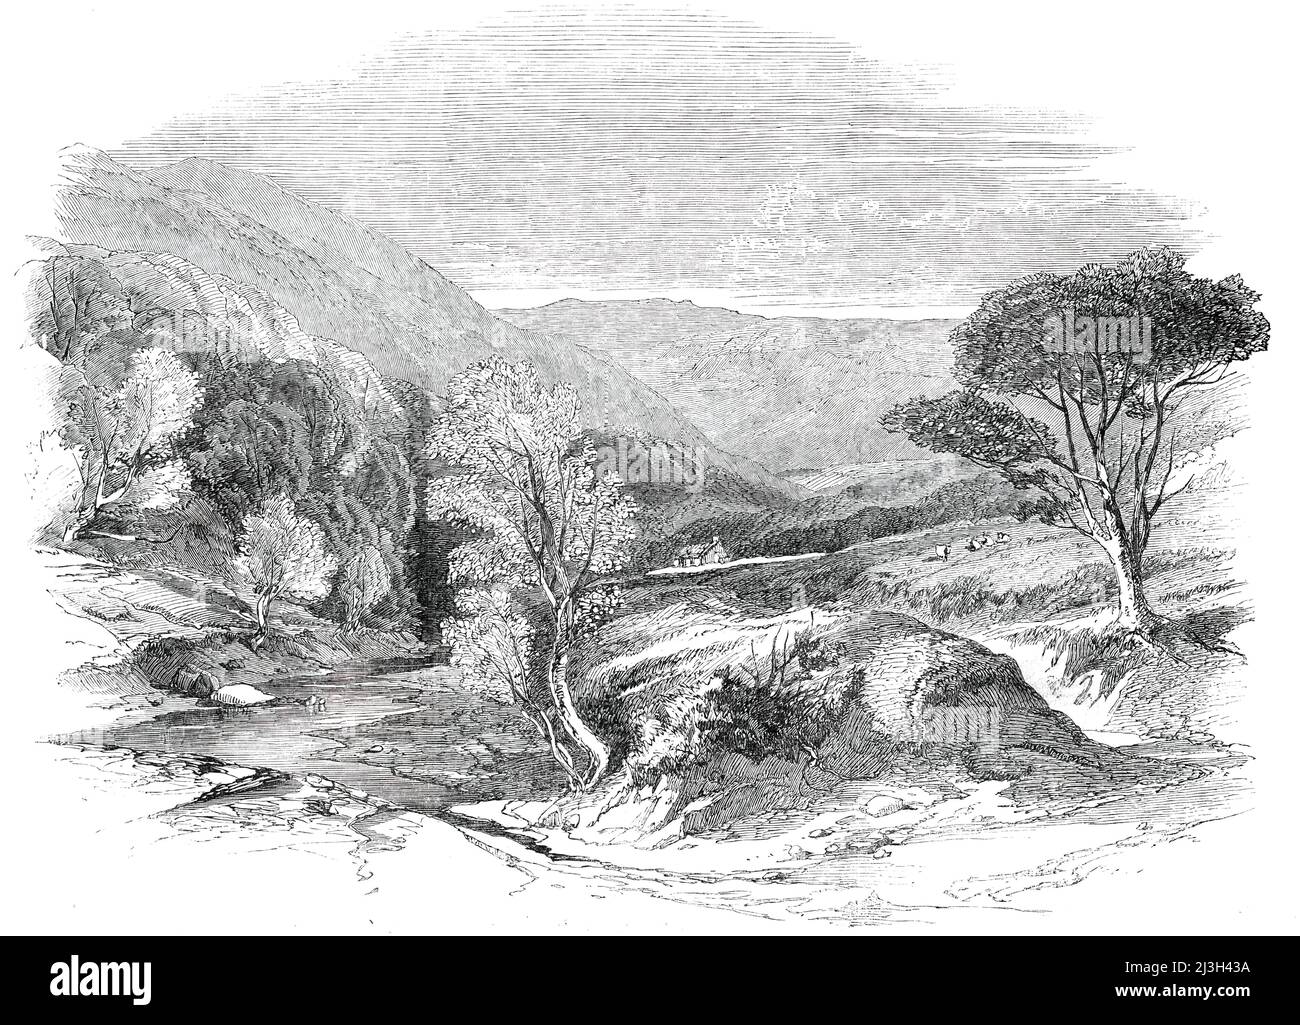 Glen Tilt, near the Marble Lodge, [in Scotland], 1850. 'There was a road through the Glen before the Duke [George Murray, 6th Duke of Atholl] was born...and though he may have - which we very much doubt - a legal right to close it, the charge of churlishness, and a want of sympathy with the public feeling, still remains...Surely his wild glen...would be none the worse if an occasional traveller were allowed to admire it without taking out a passport!...The example set by those princely-minded noblemen who...are not afraid of any desecration from the feet of plebeians, is worthy of imitation... Stock Photo